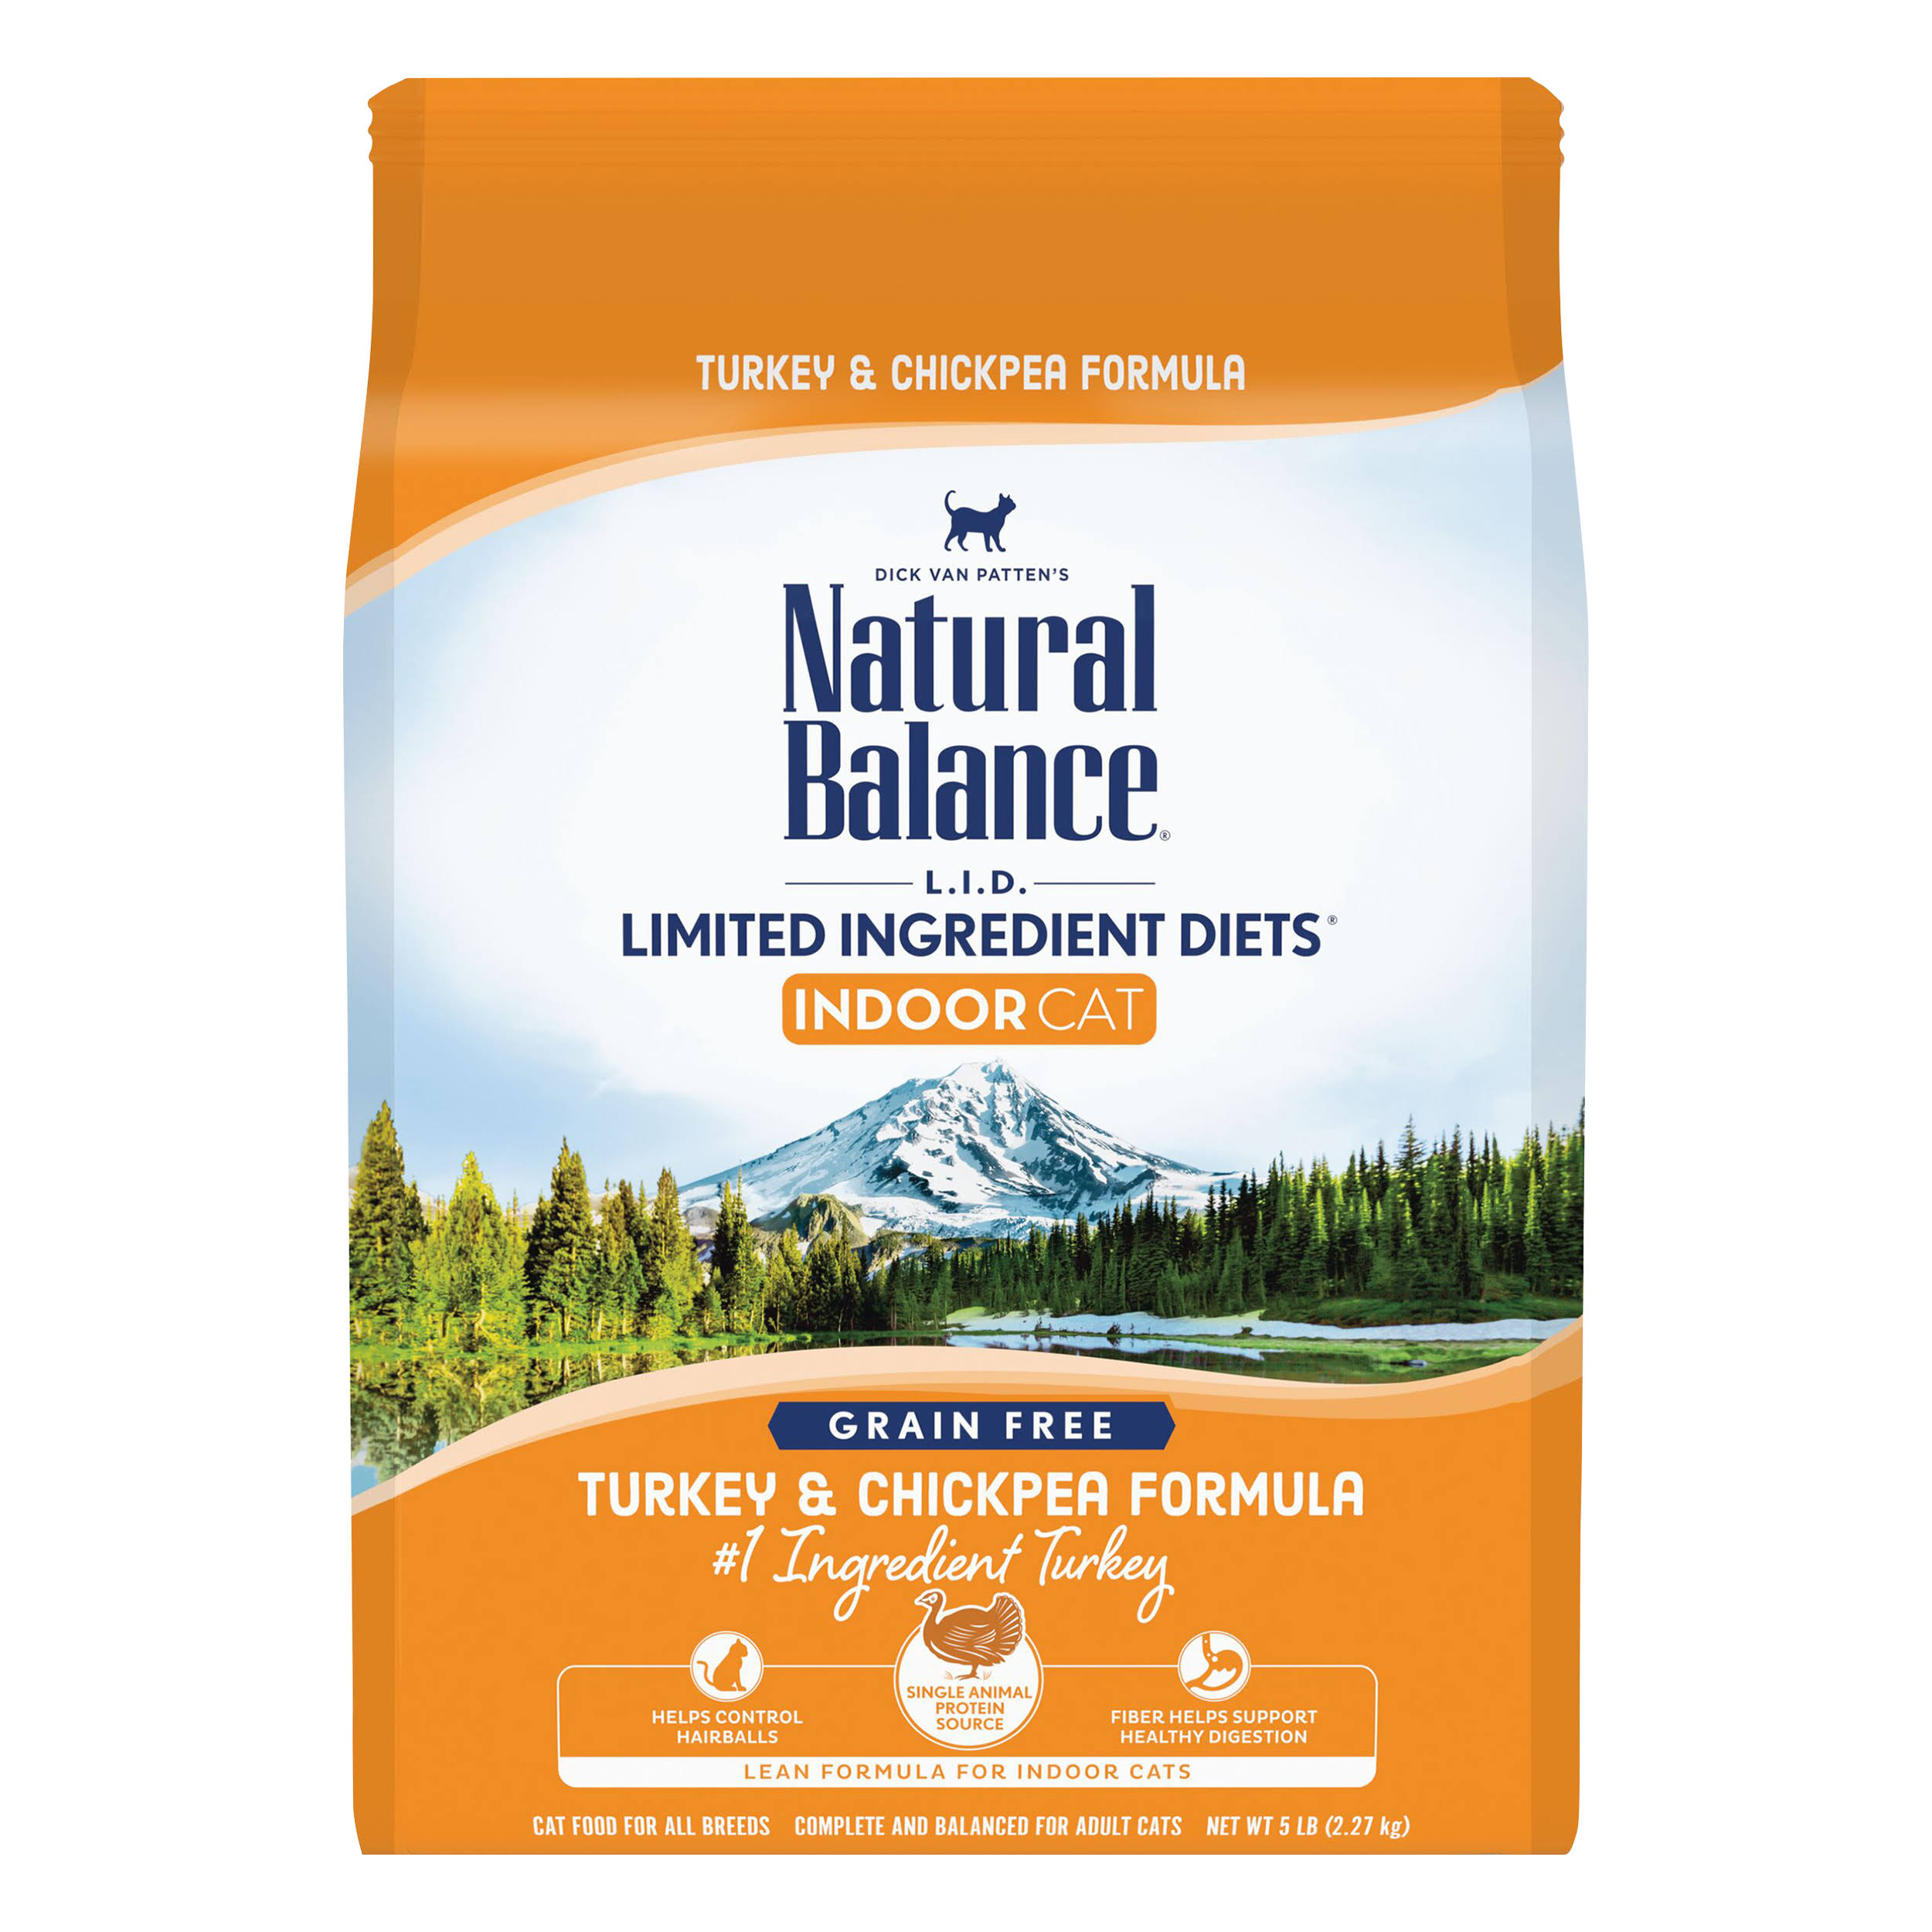 Natural Balance Limited Ingredient Diets Dry Cat Food for Indoor Cats - Turkey and Chickpea, 5lb